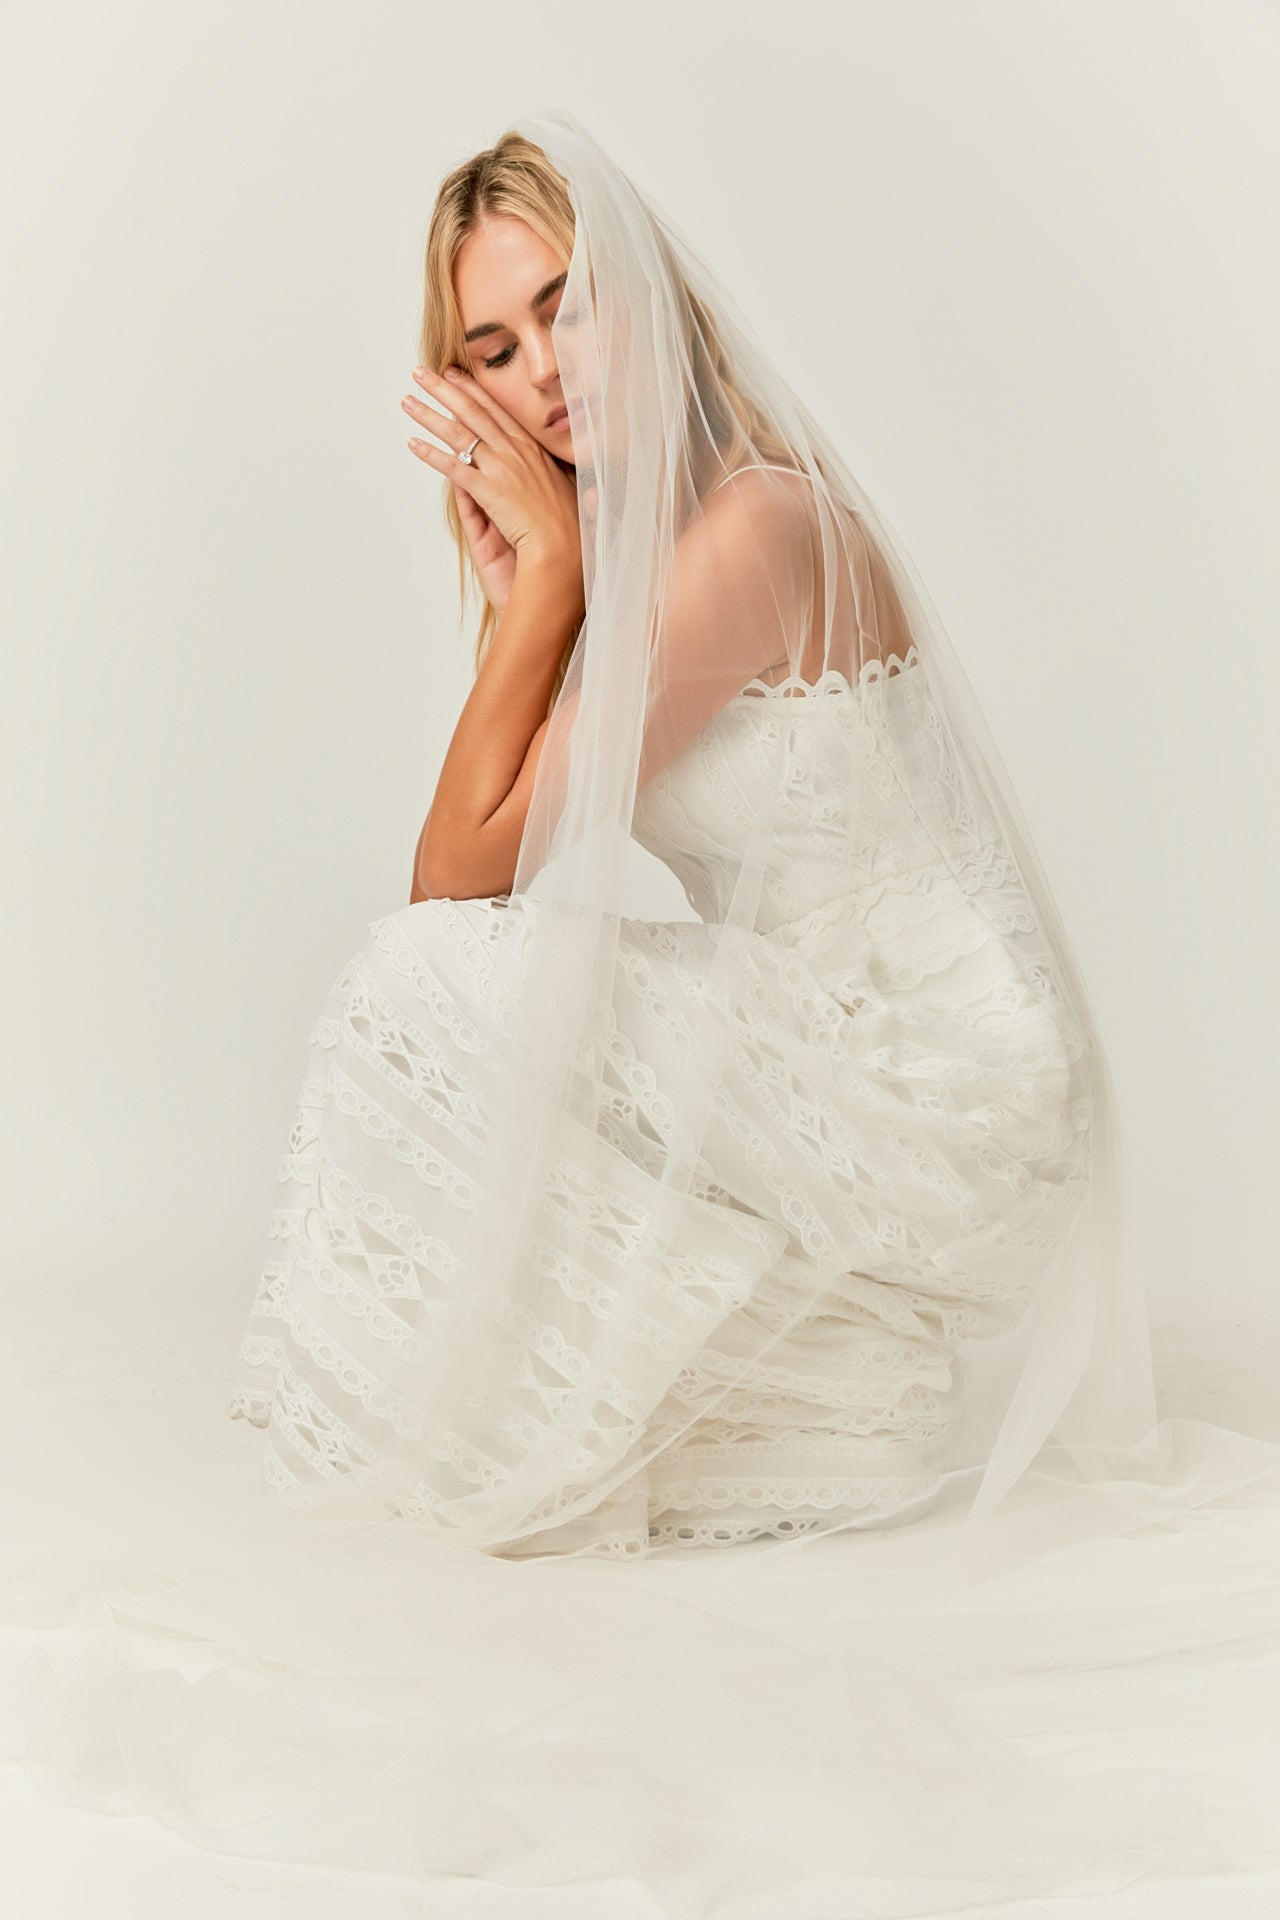 Discover the Lace Maxi Dress featured in "The Wedding Edit" by Endless Rose